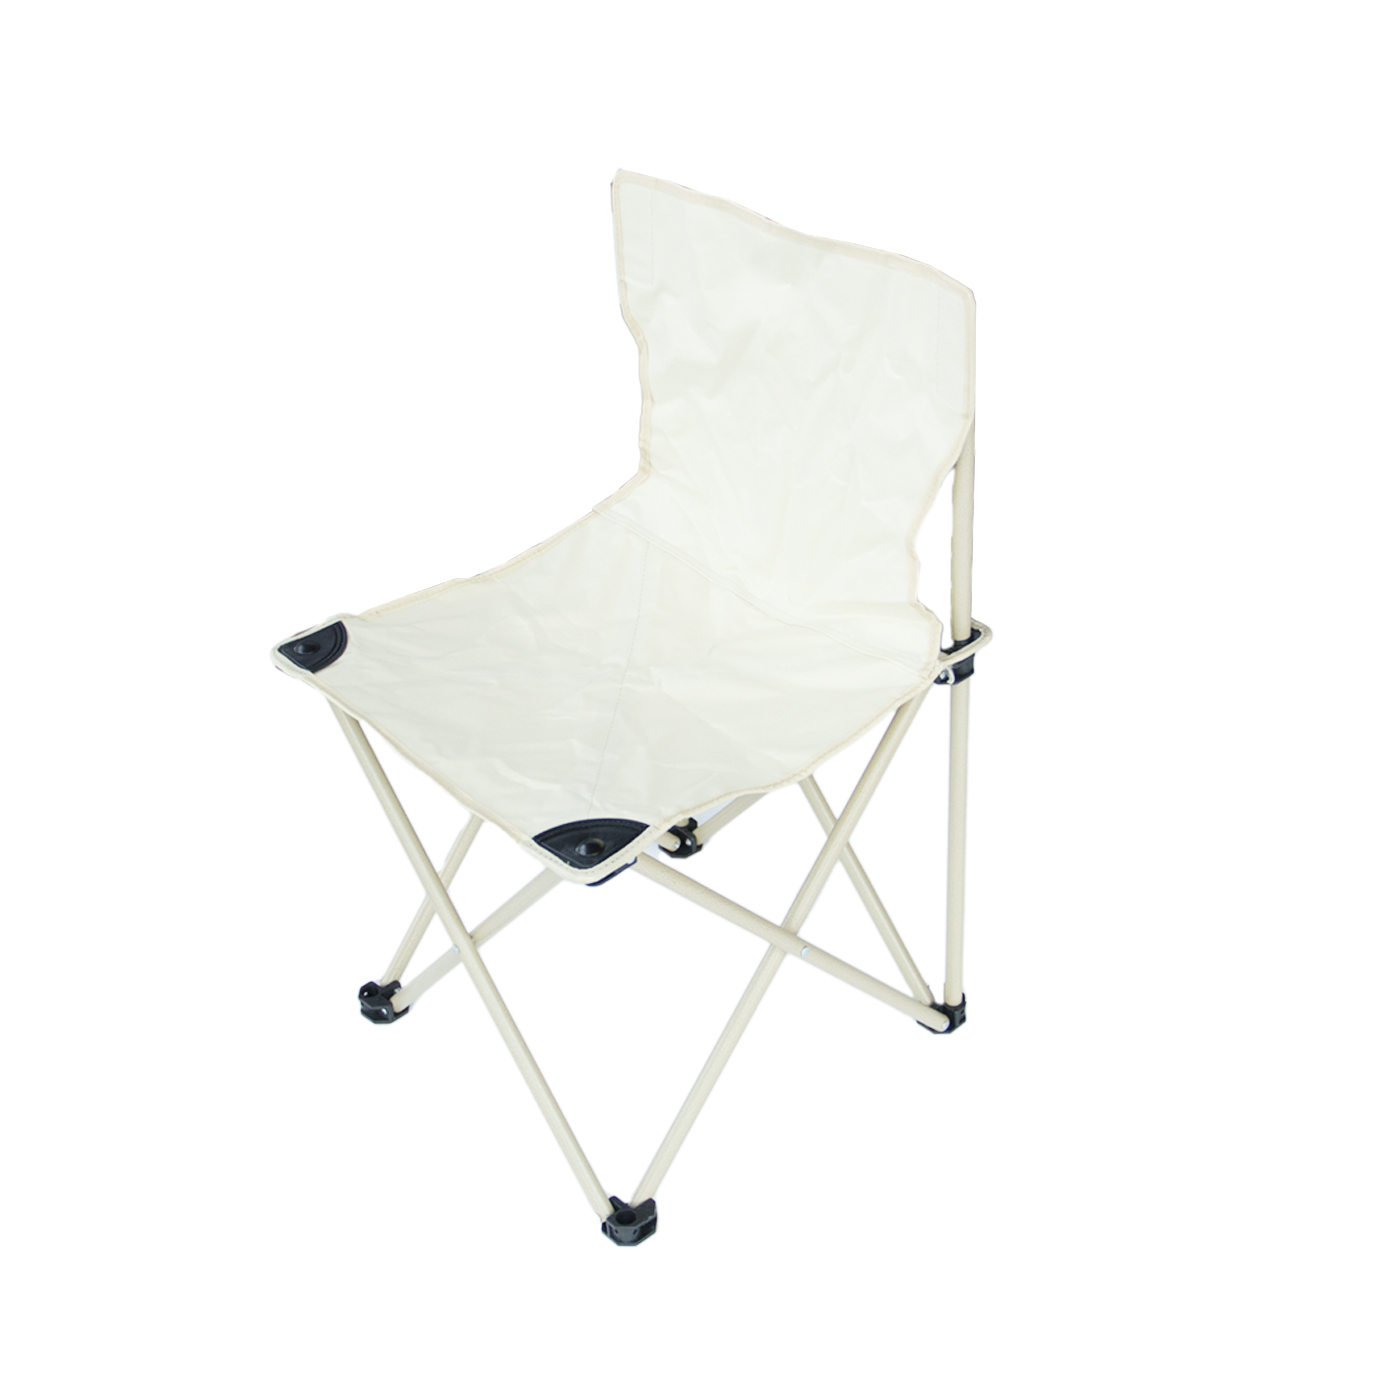 Outdoor Folding Chair With Carrying Bag2